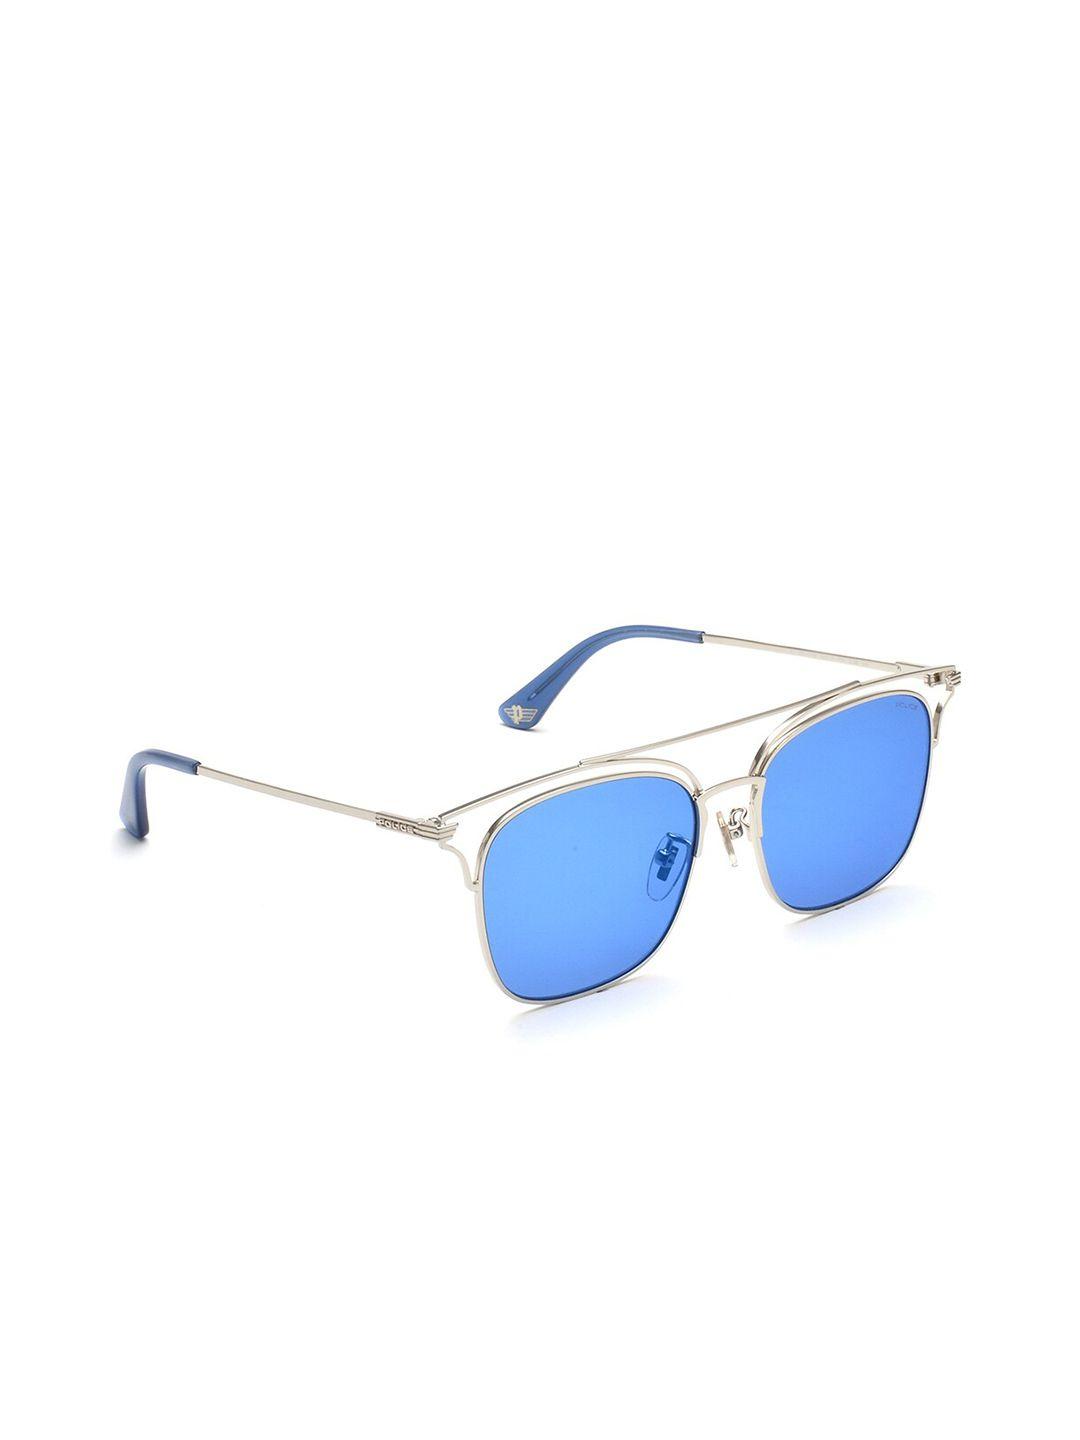 police women square sunglasses with uv protected lens